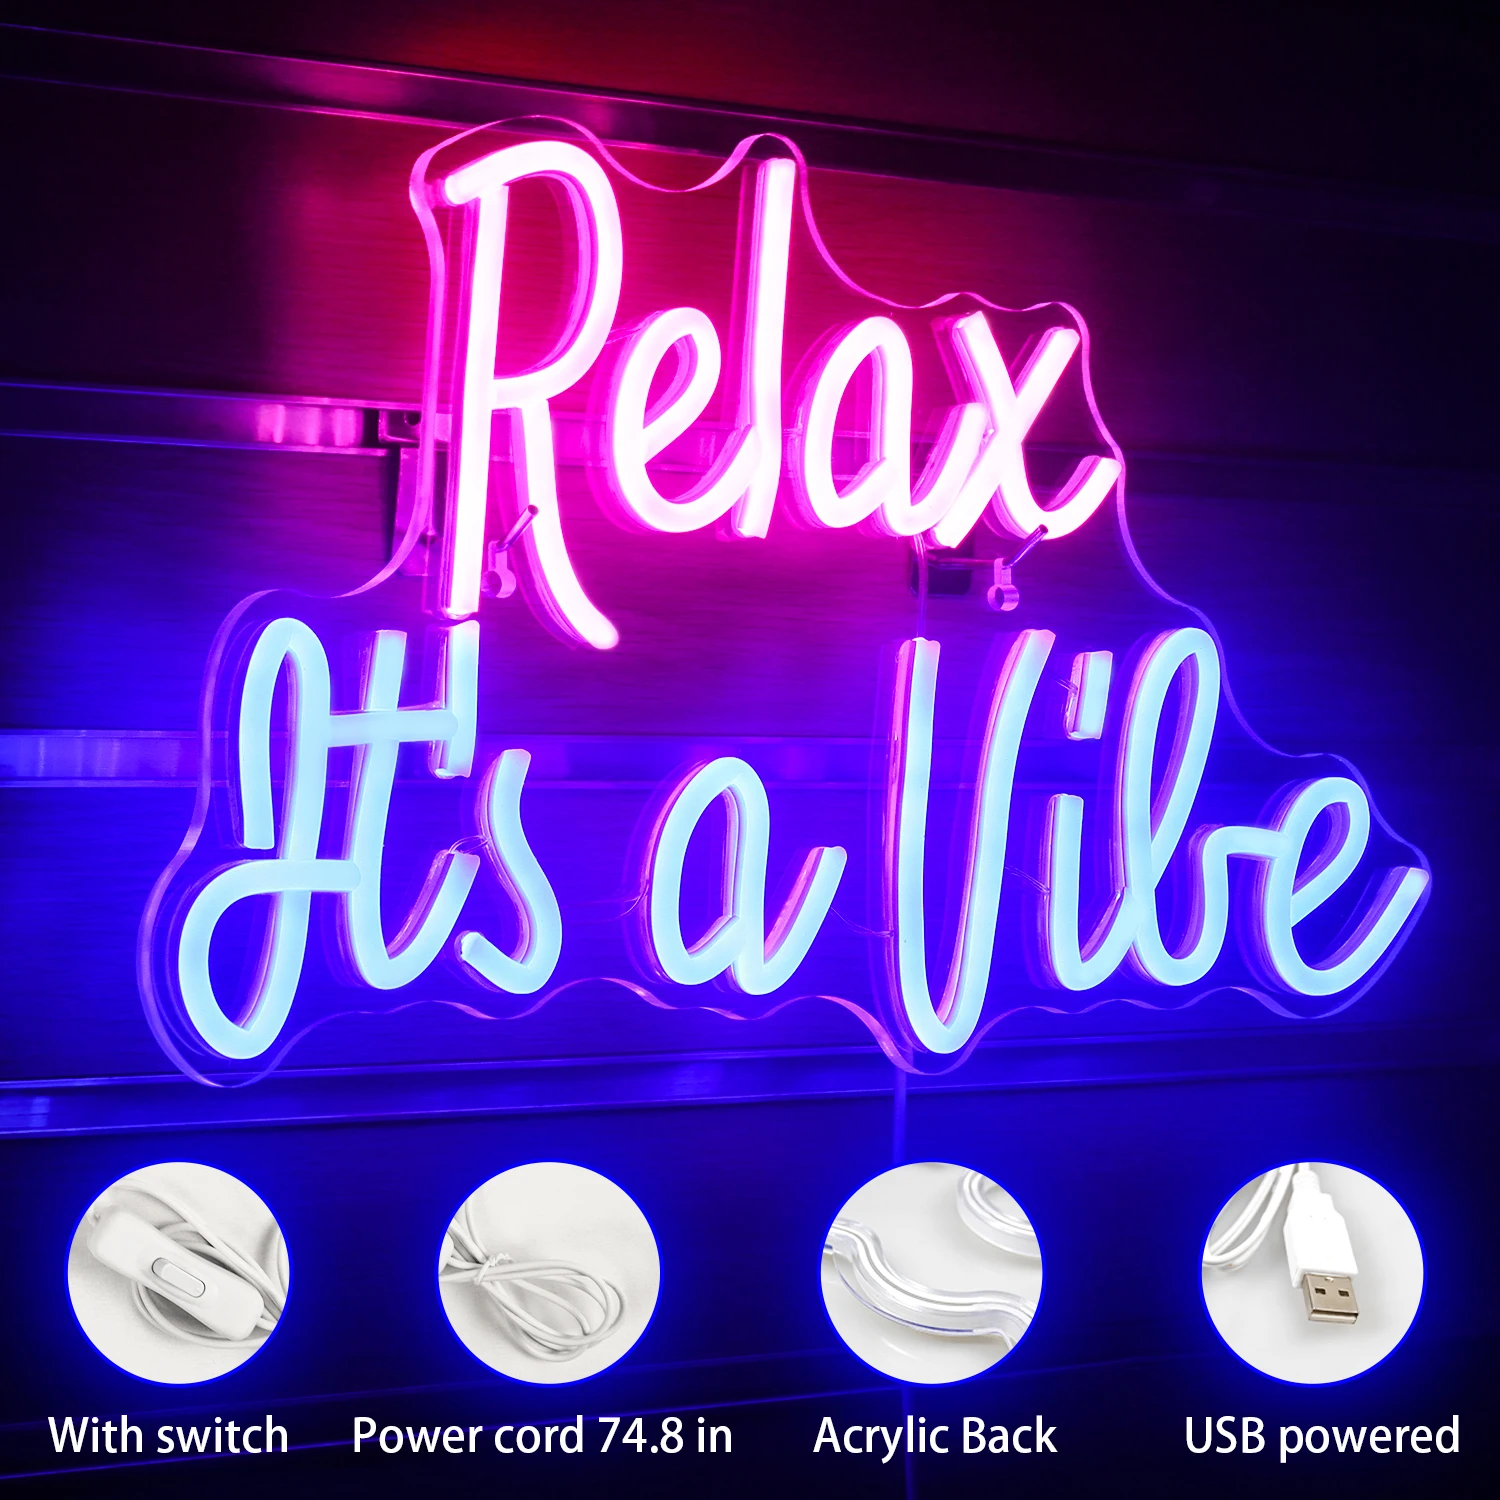 Relax it's a Vibe Neon Sign LED Room Wall Decor USB Powered For Party Bedroom sala giochi Club Party Gaming Light Man Cave Decor